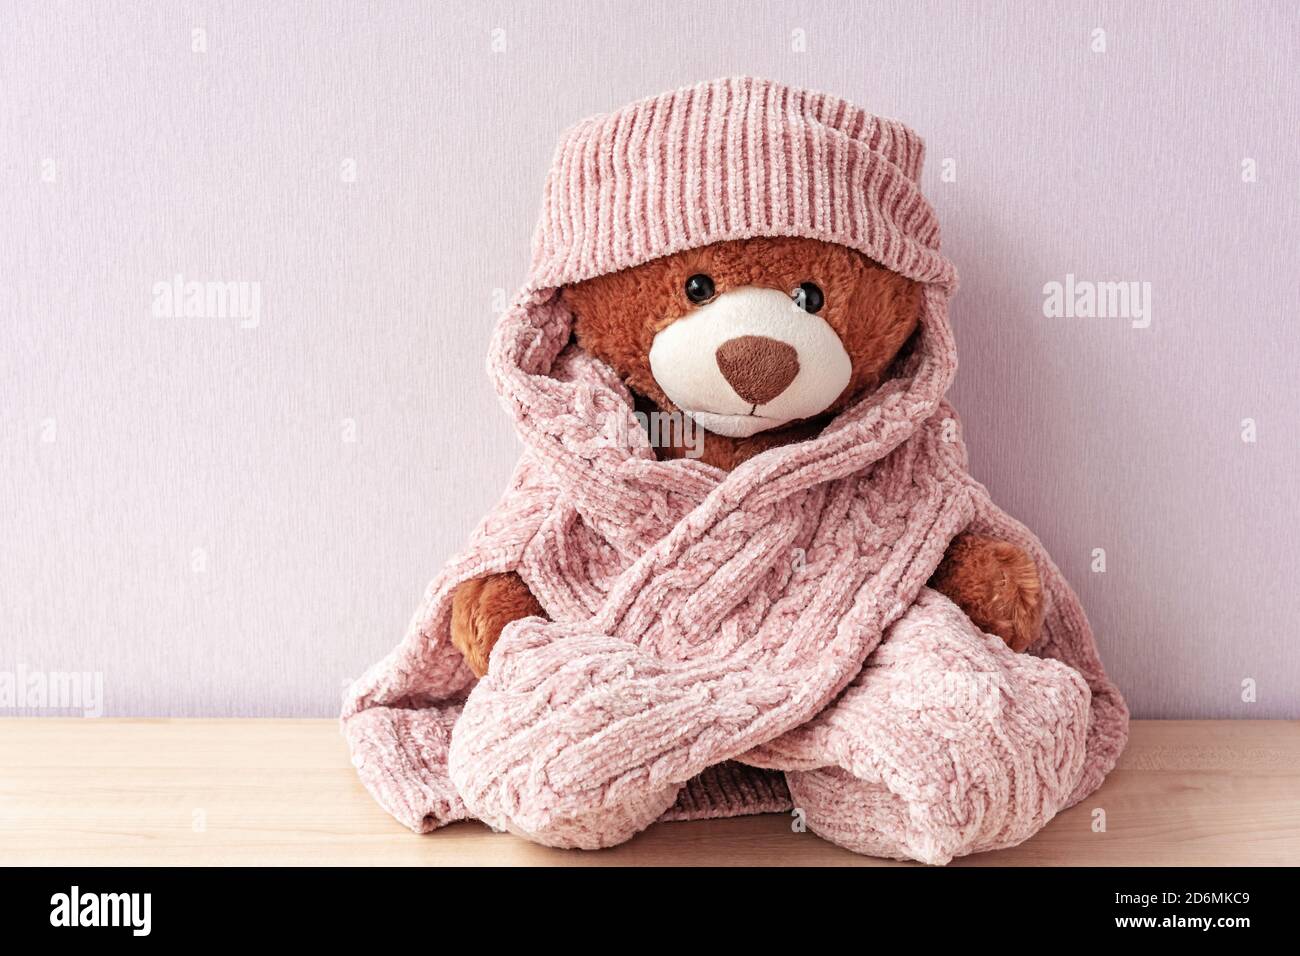 Brown plush bear wrapped in warm sweater with hat Stock Photo